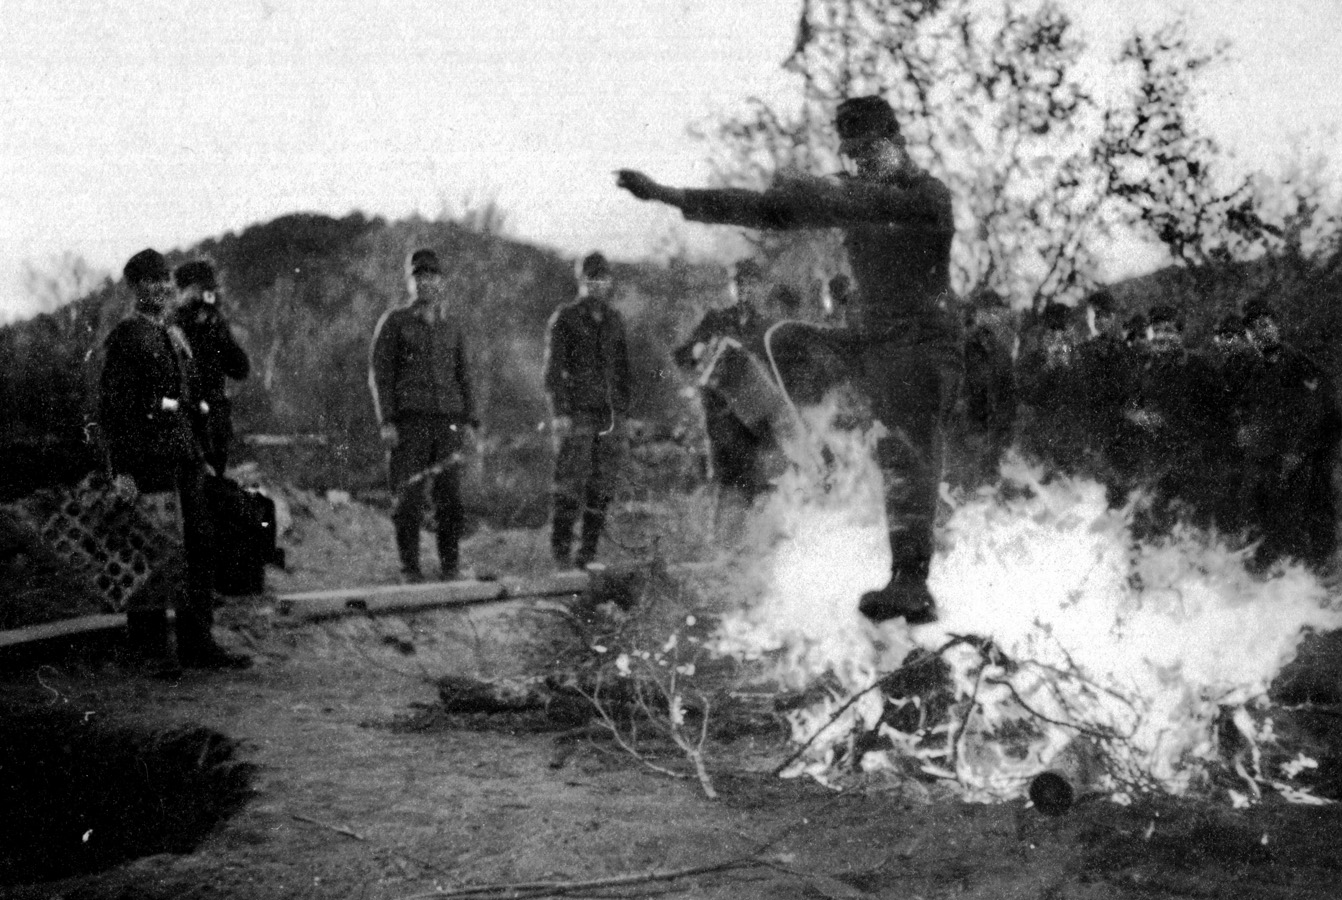 Much to the amusement of his comrades, a soldier leaps over a bonfire while another soldier (second from left) snaps his photo. Another soldier in the background appears to be holding an accordion.